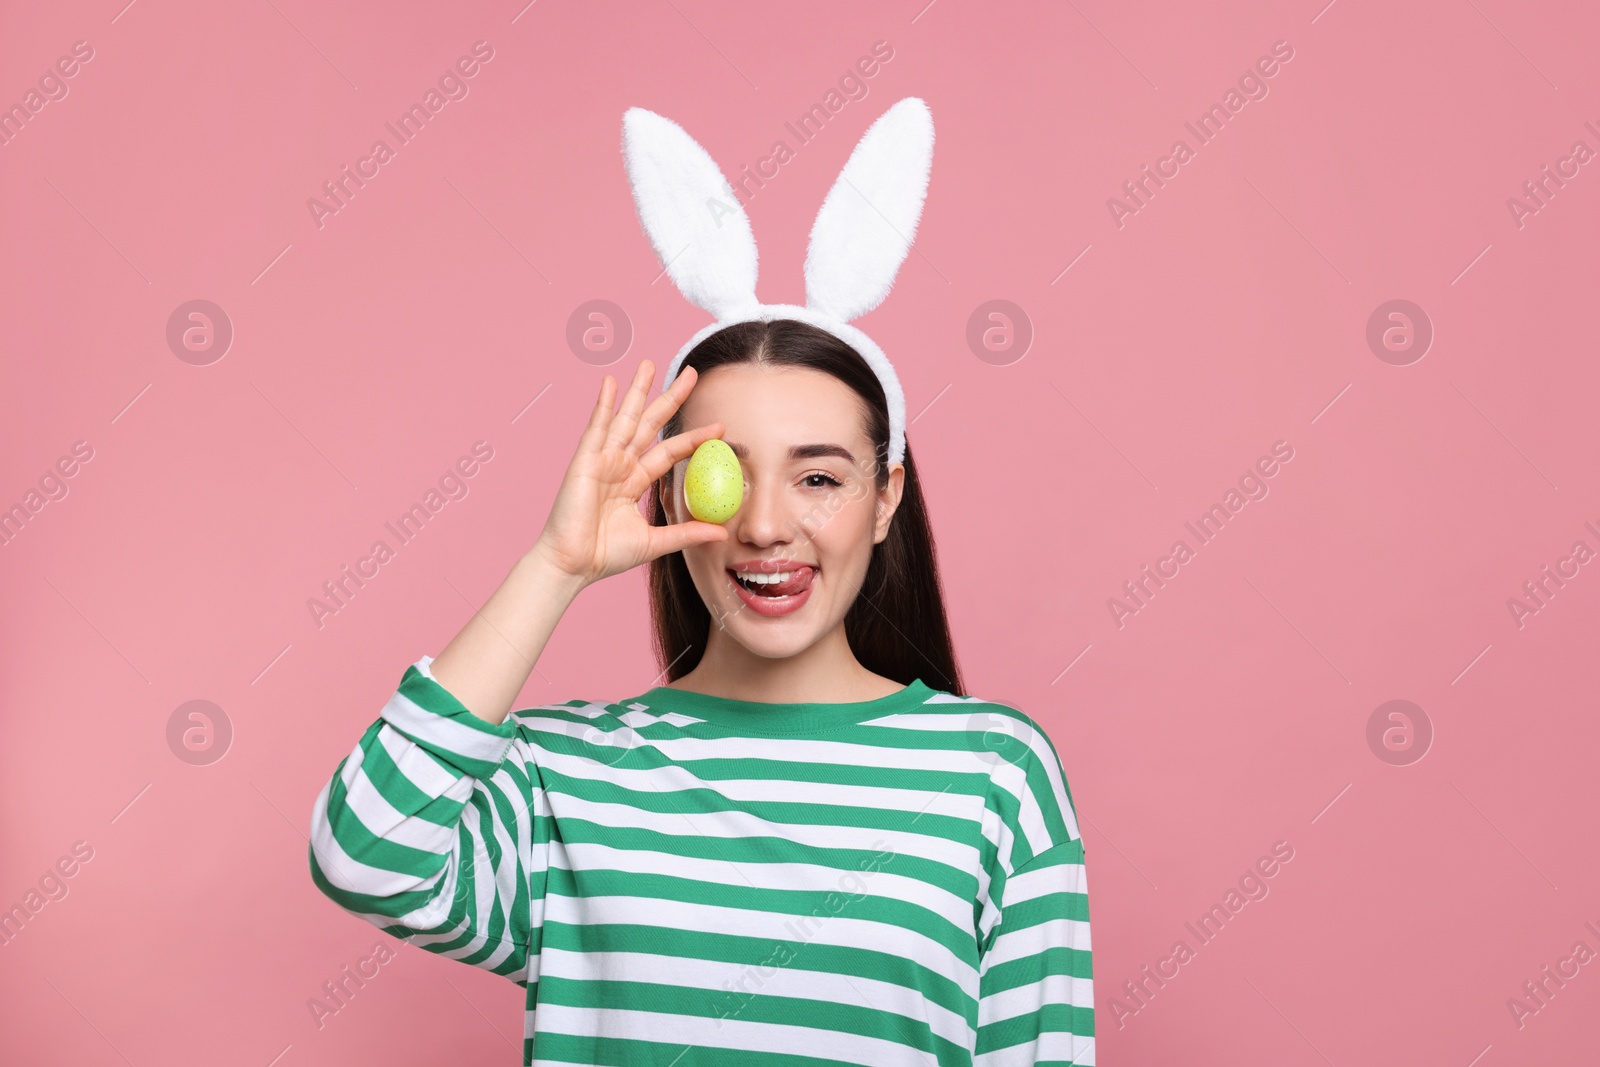 Photo of Happy woman in bunny ears headband holding painted Easter egg on pink background